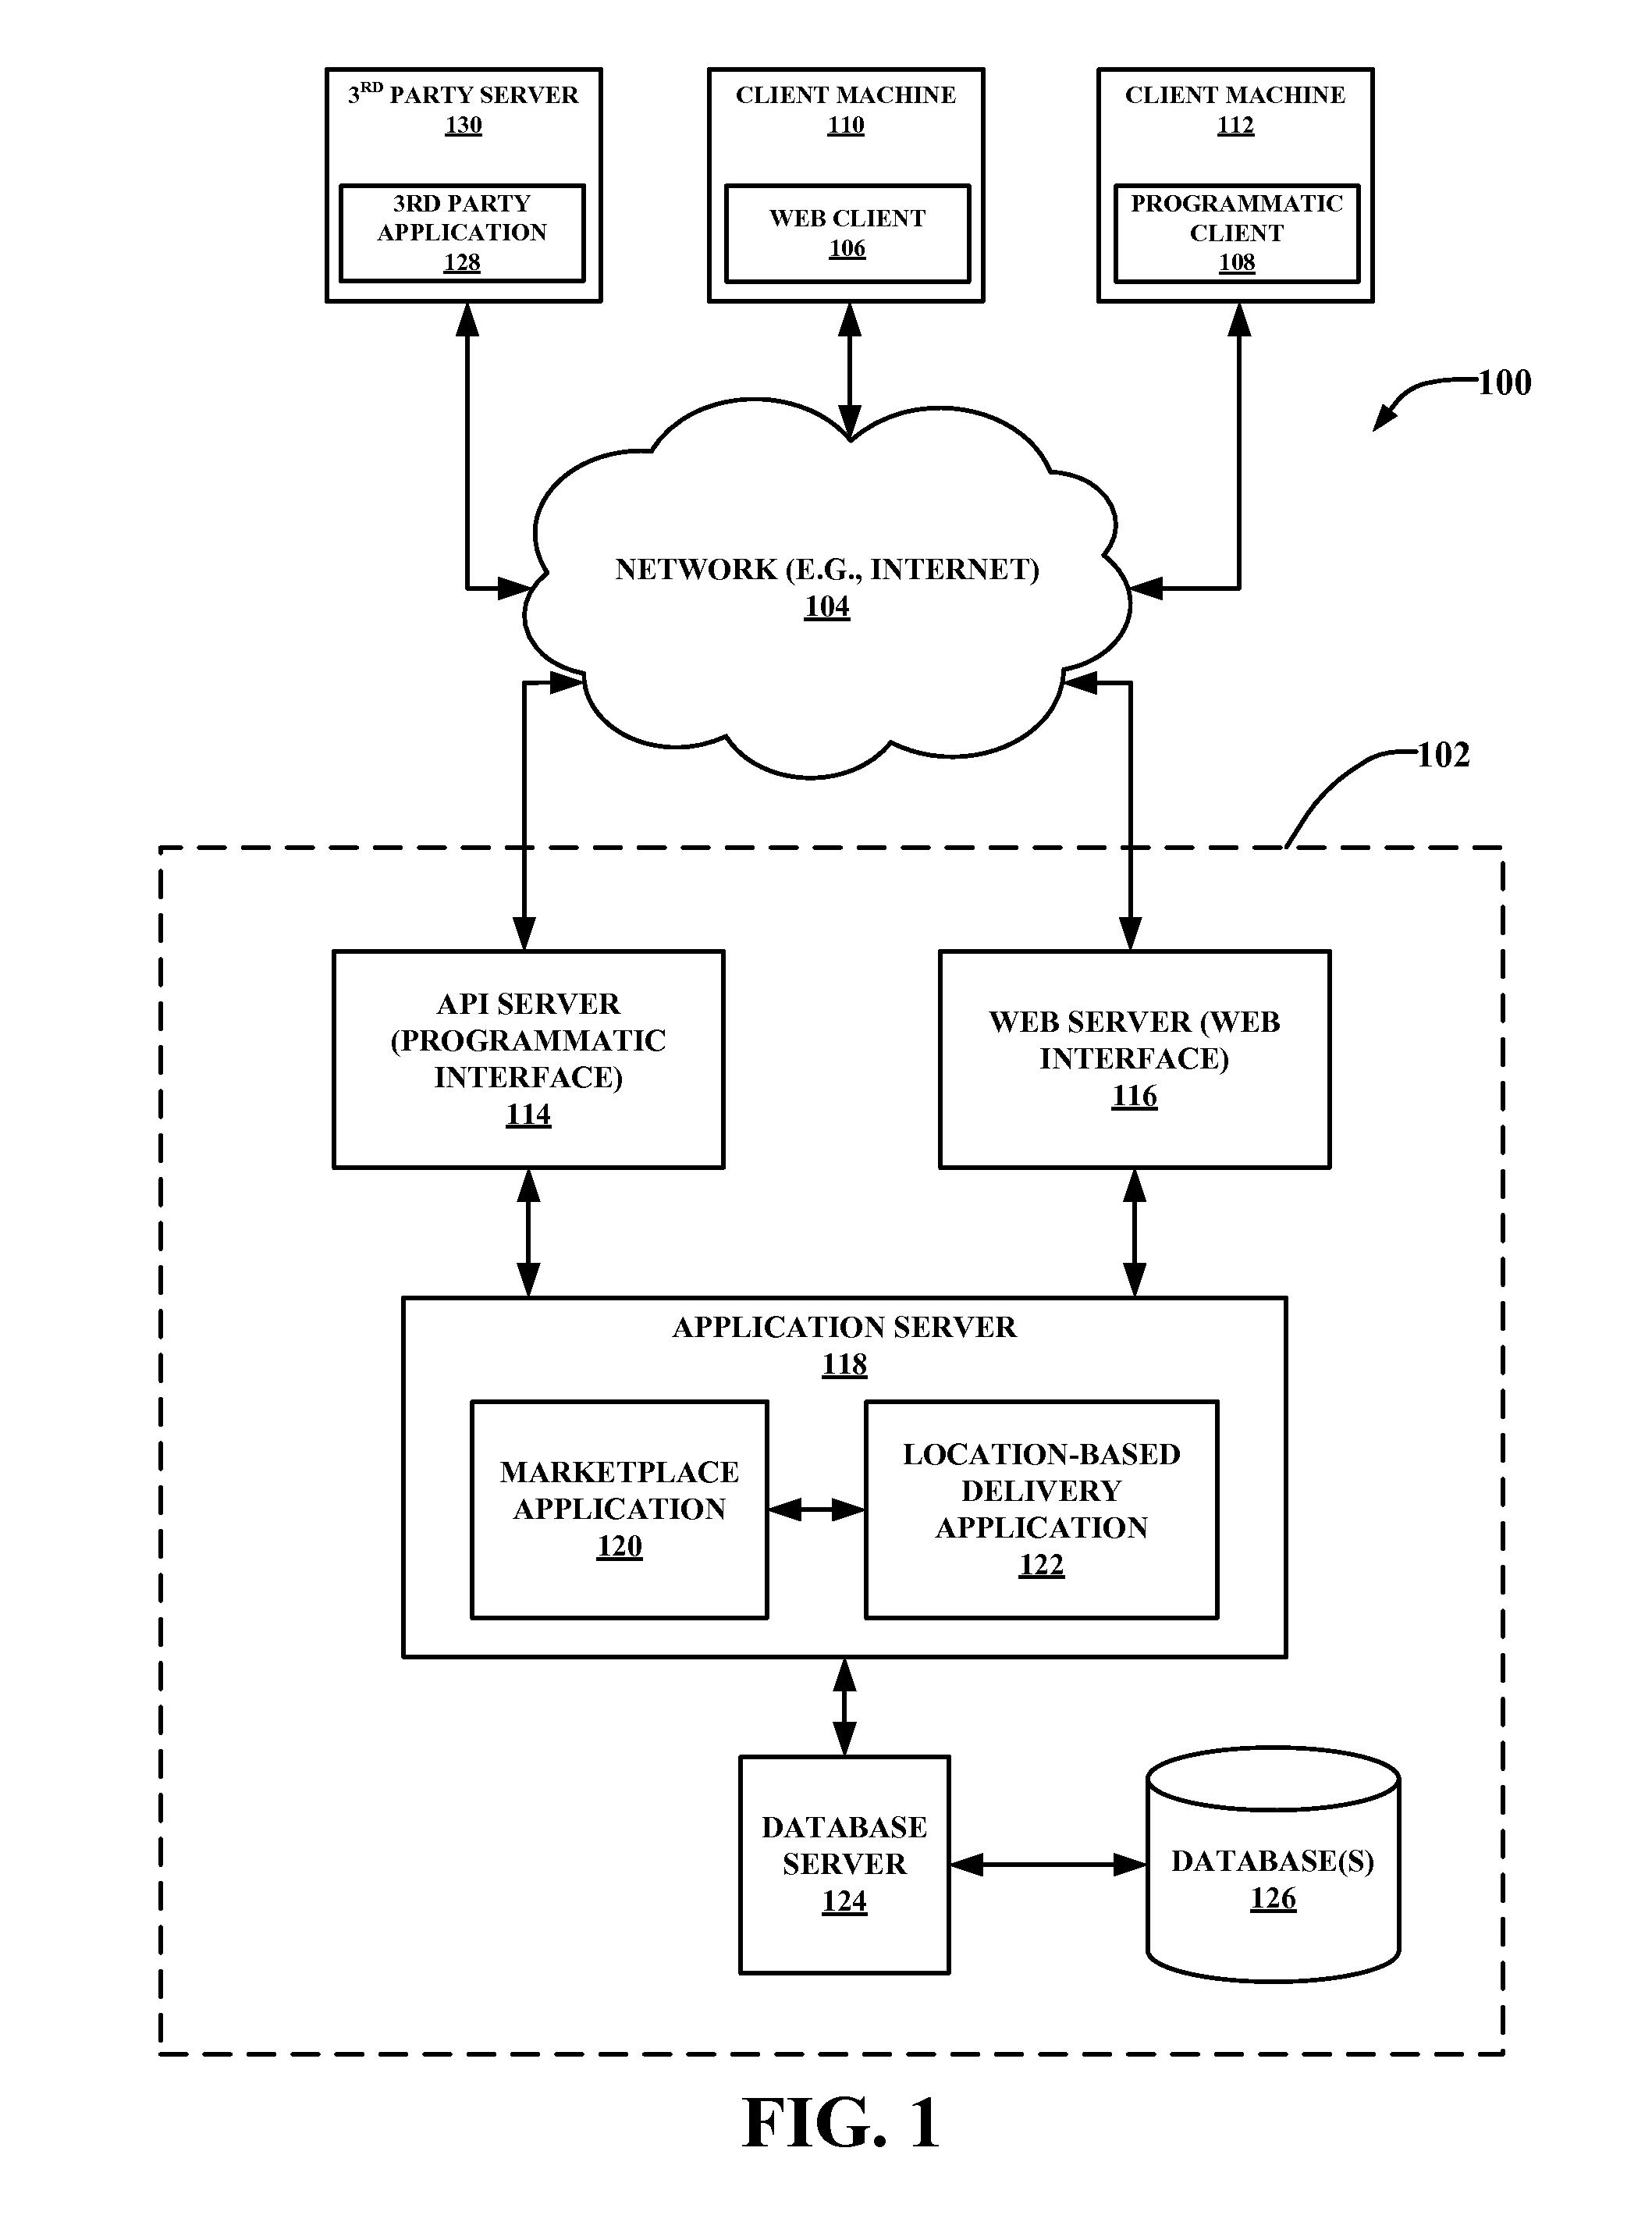 Location-based triggered delivery system